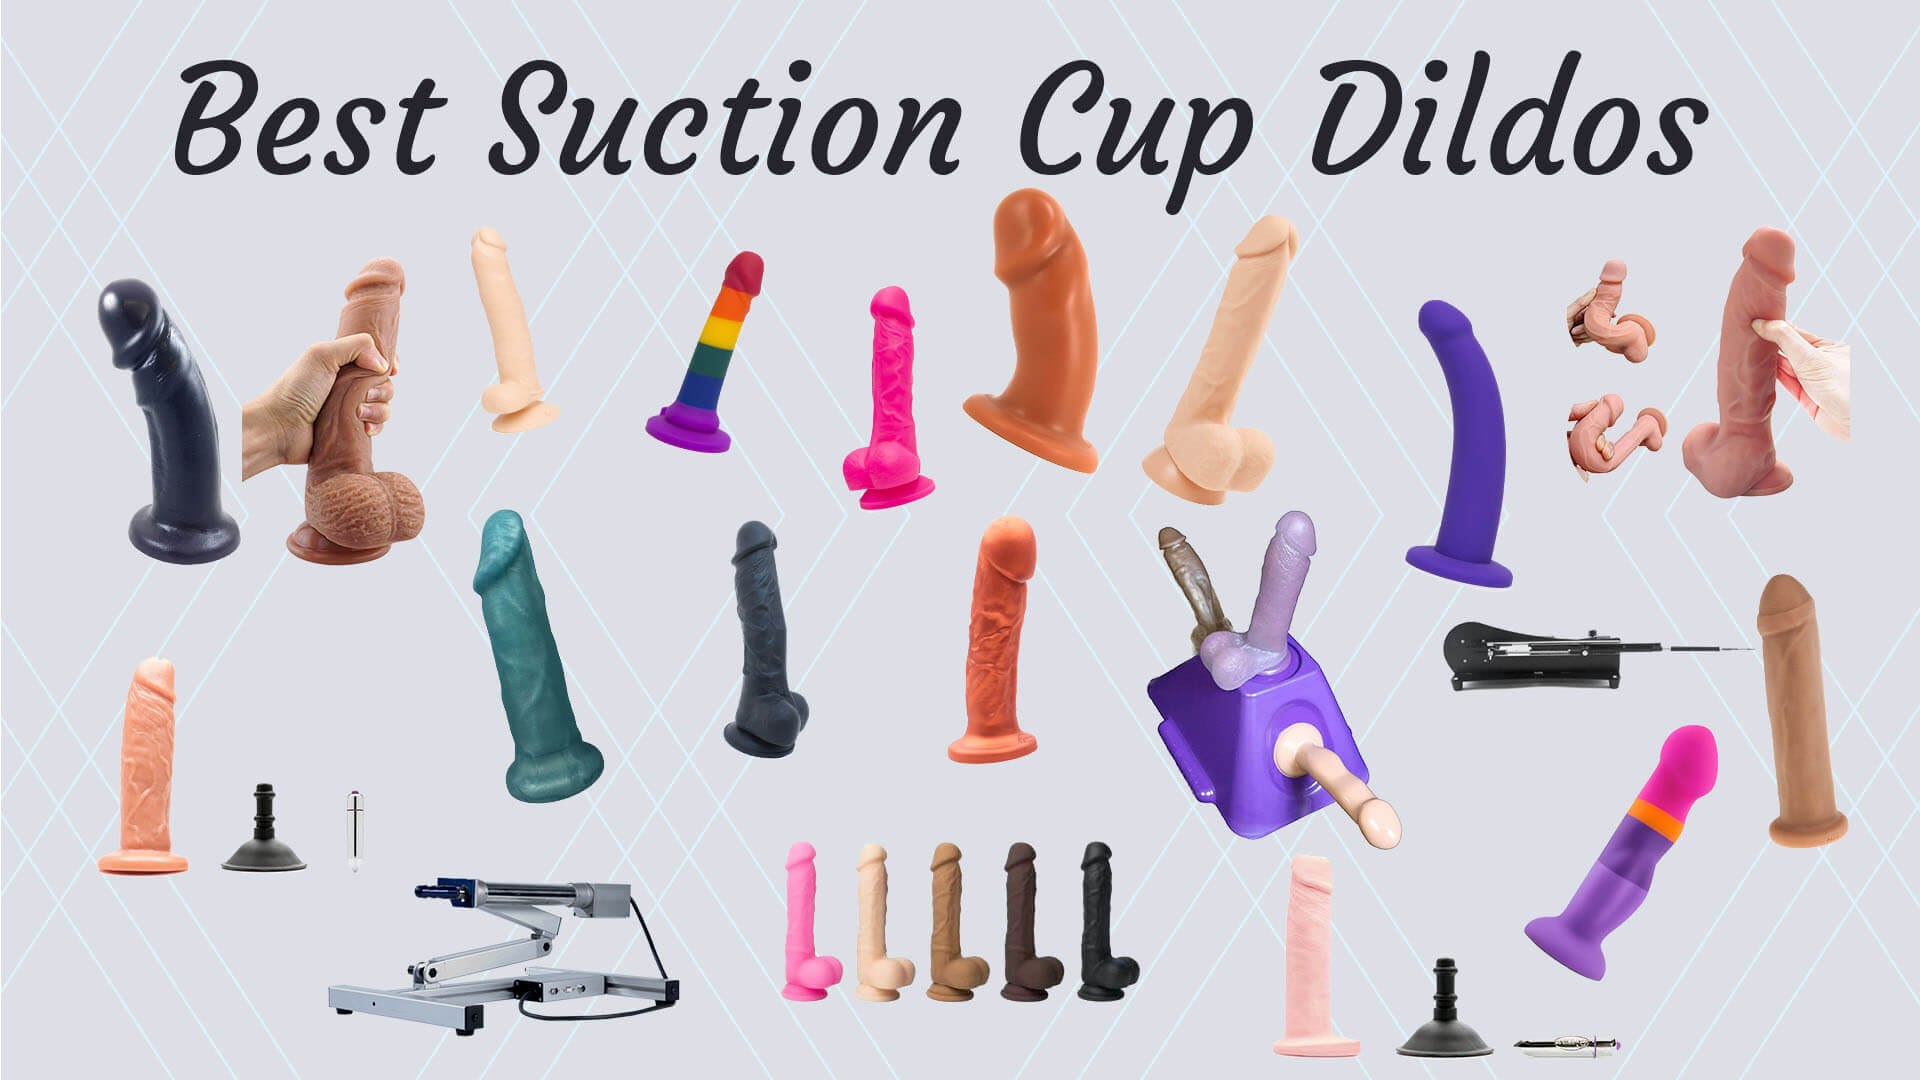 The 20 Best Suction Cup Dildo Toys - Shower Wall Dildos & More.